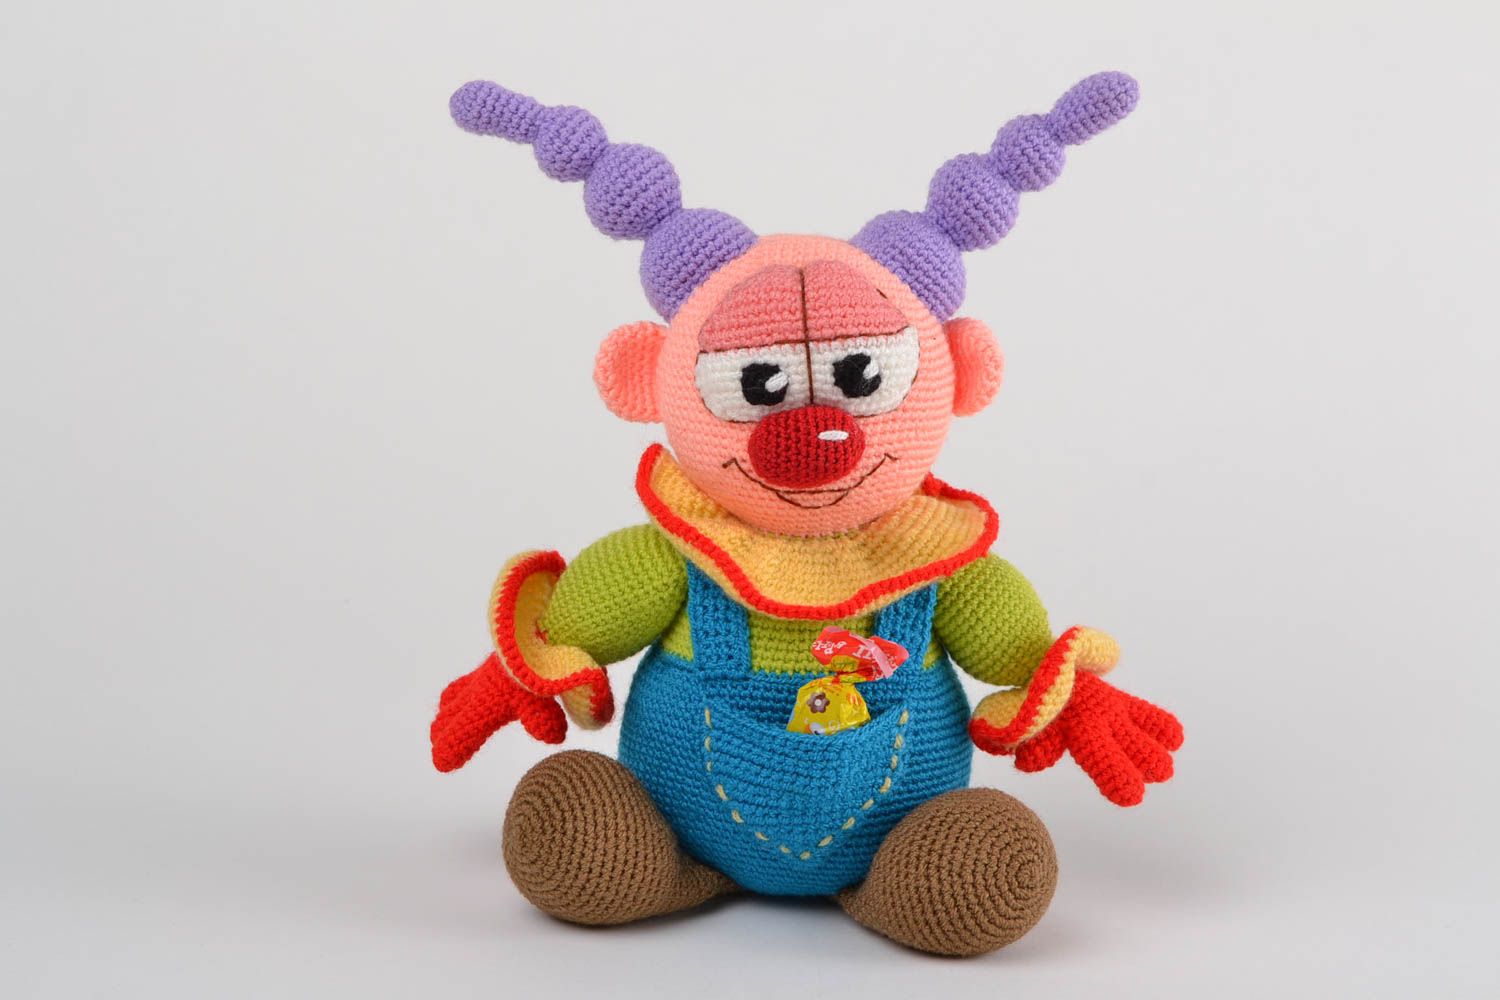 Handmade designer soft toy crocheted of acrylic threads colorful bright clown photo 1